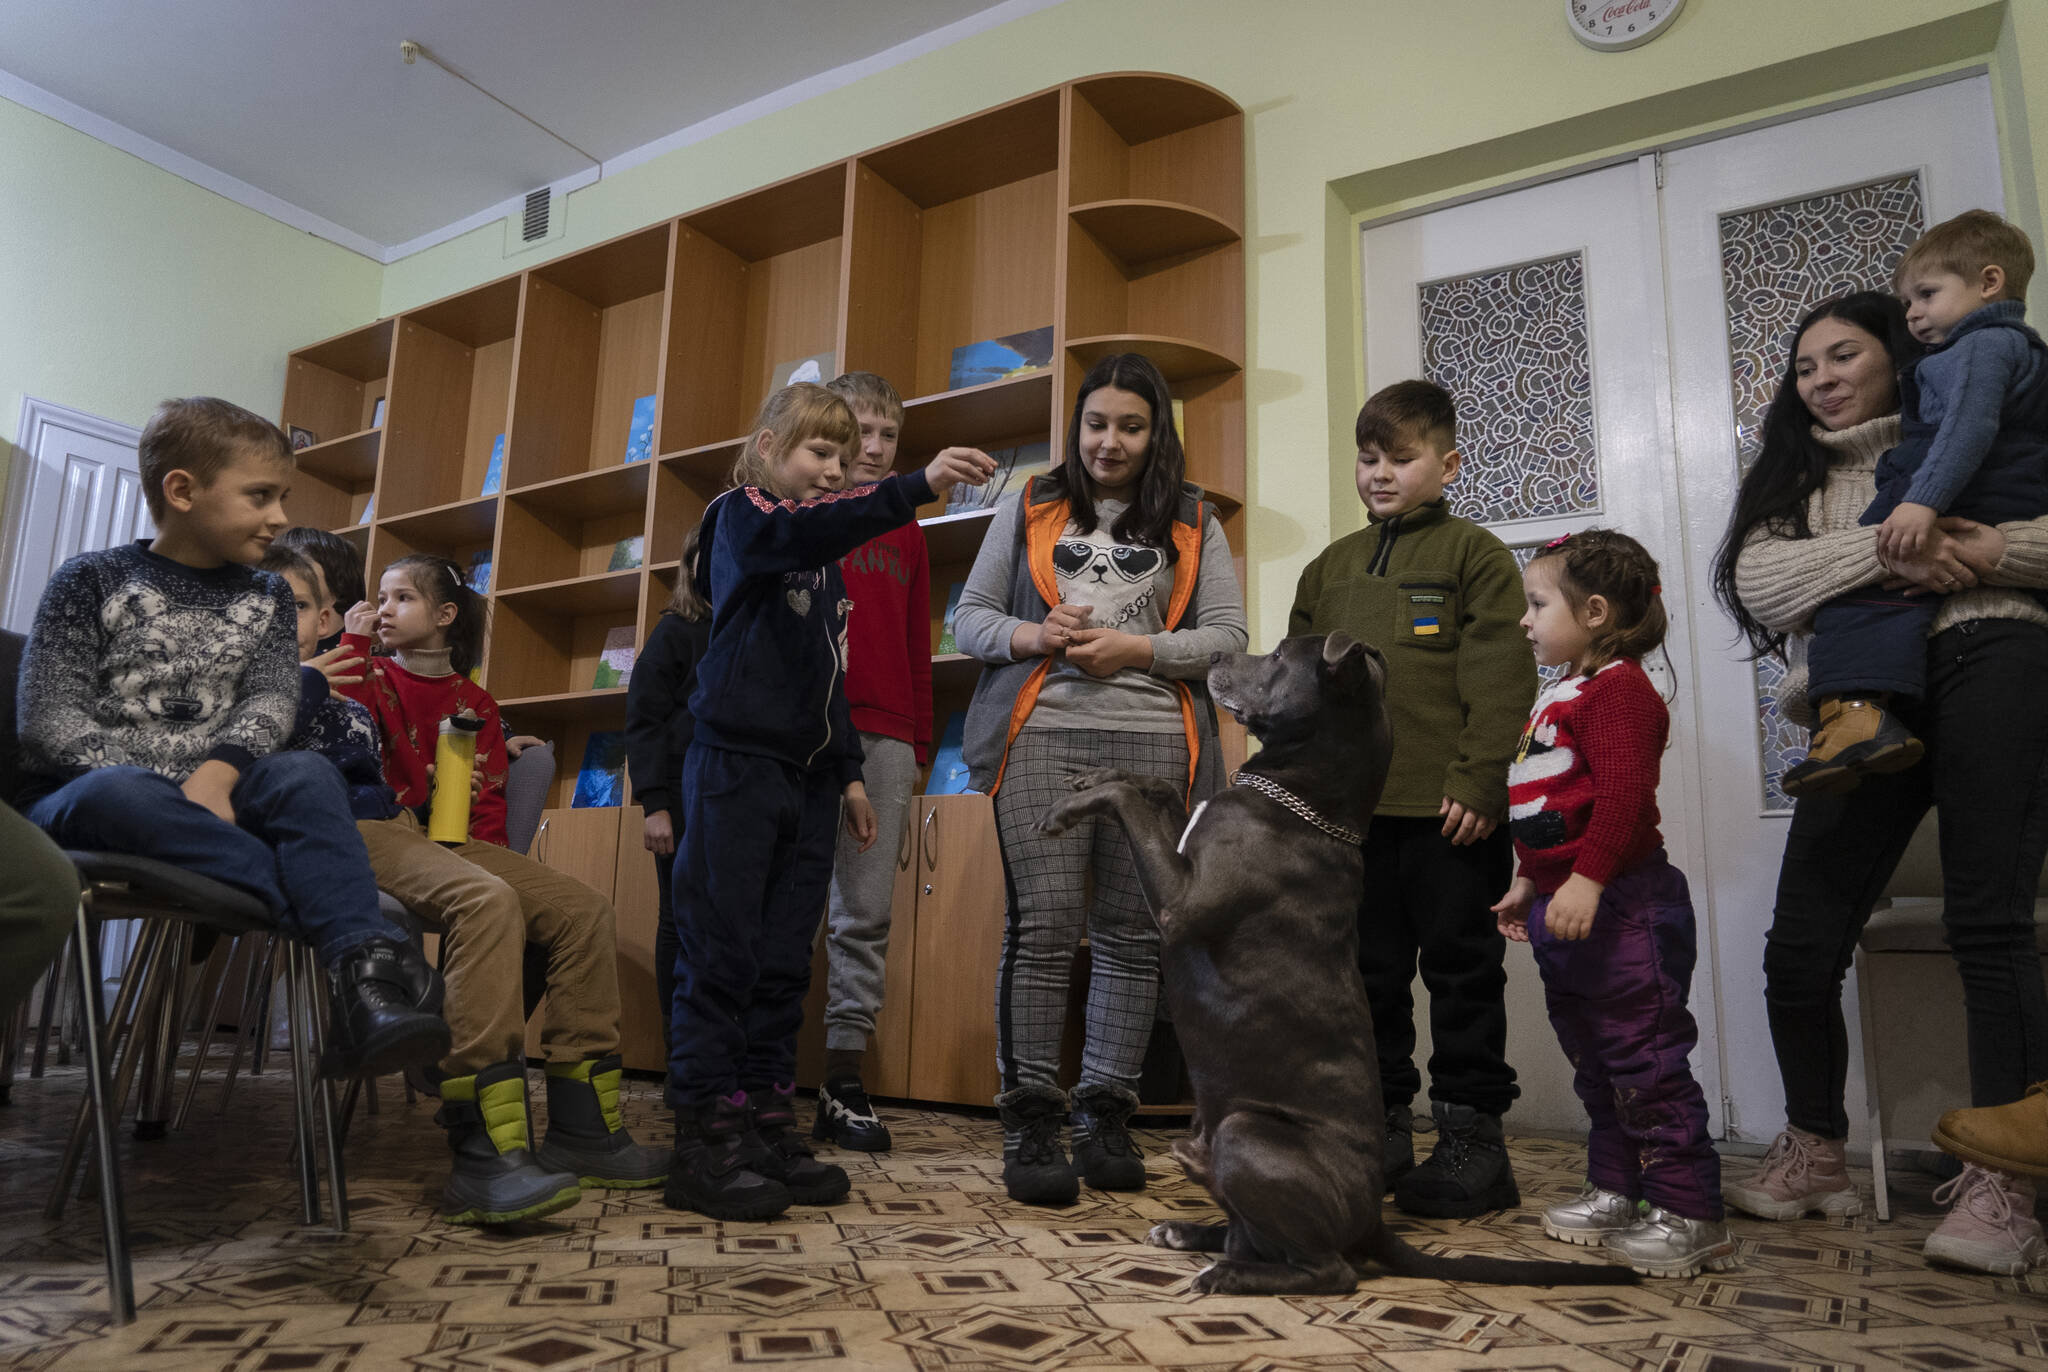 Children traumatized by the war play with an American Pit Bull Terrier “Bice” in the Center for Social and Psychological Rehabilitation in Boyarka close Kyiv, Ukraine, Wednesday, Dec. 7, 2022. Bice is an American pit bull terrier with an important and sensitive job in Ukraine — comforting children traumatized by the war. The Center for Social and Psychological Rehabilitation is a state-operated community center where a group of people are trying to help those who have experienced a trauma after the Feb. 24 Russian invasion, and now they are using dogs like Bice to give comfort. (AP Photo / Vasilisa Stepanenko)